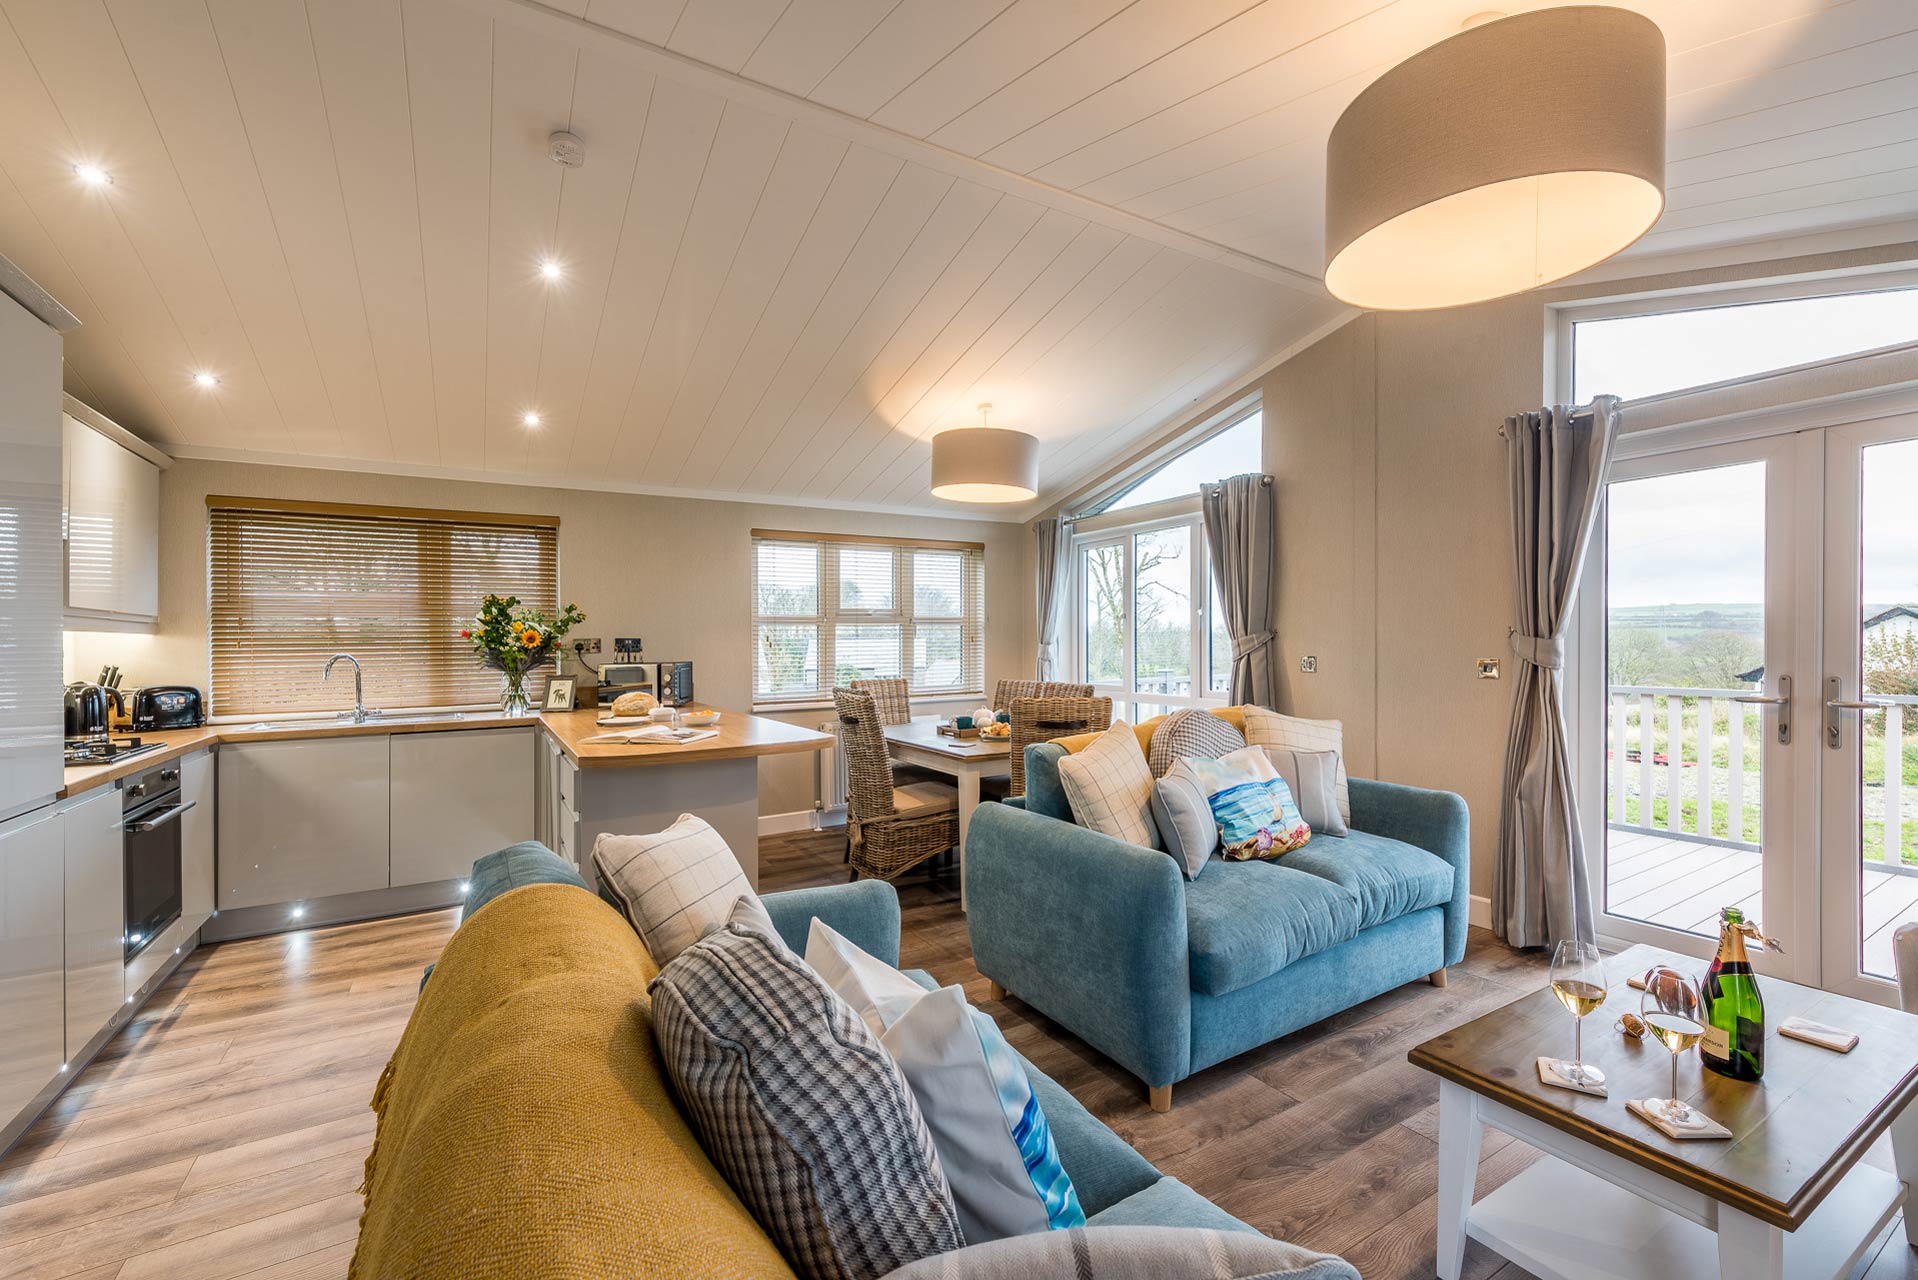 The Summerhouse Lodge at St. Tinney Farm Holidays in Cornwall